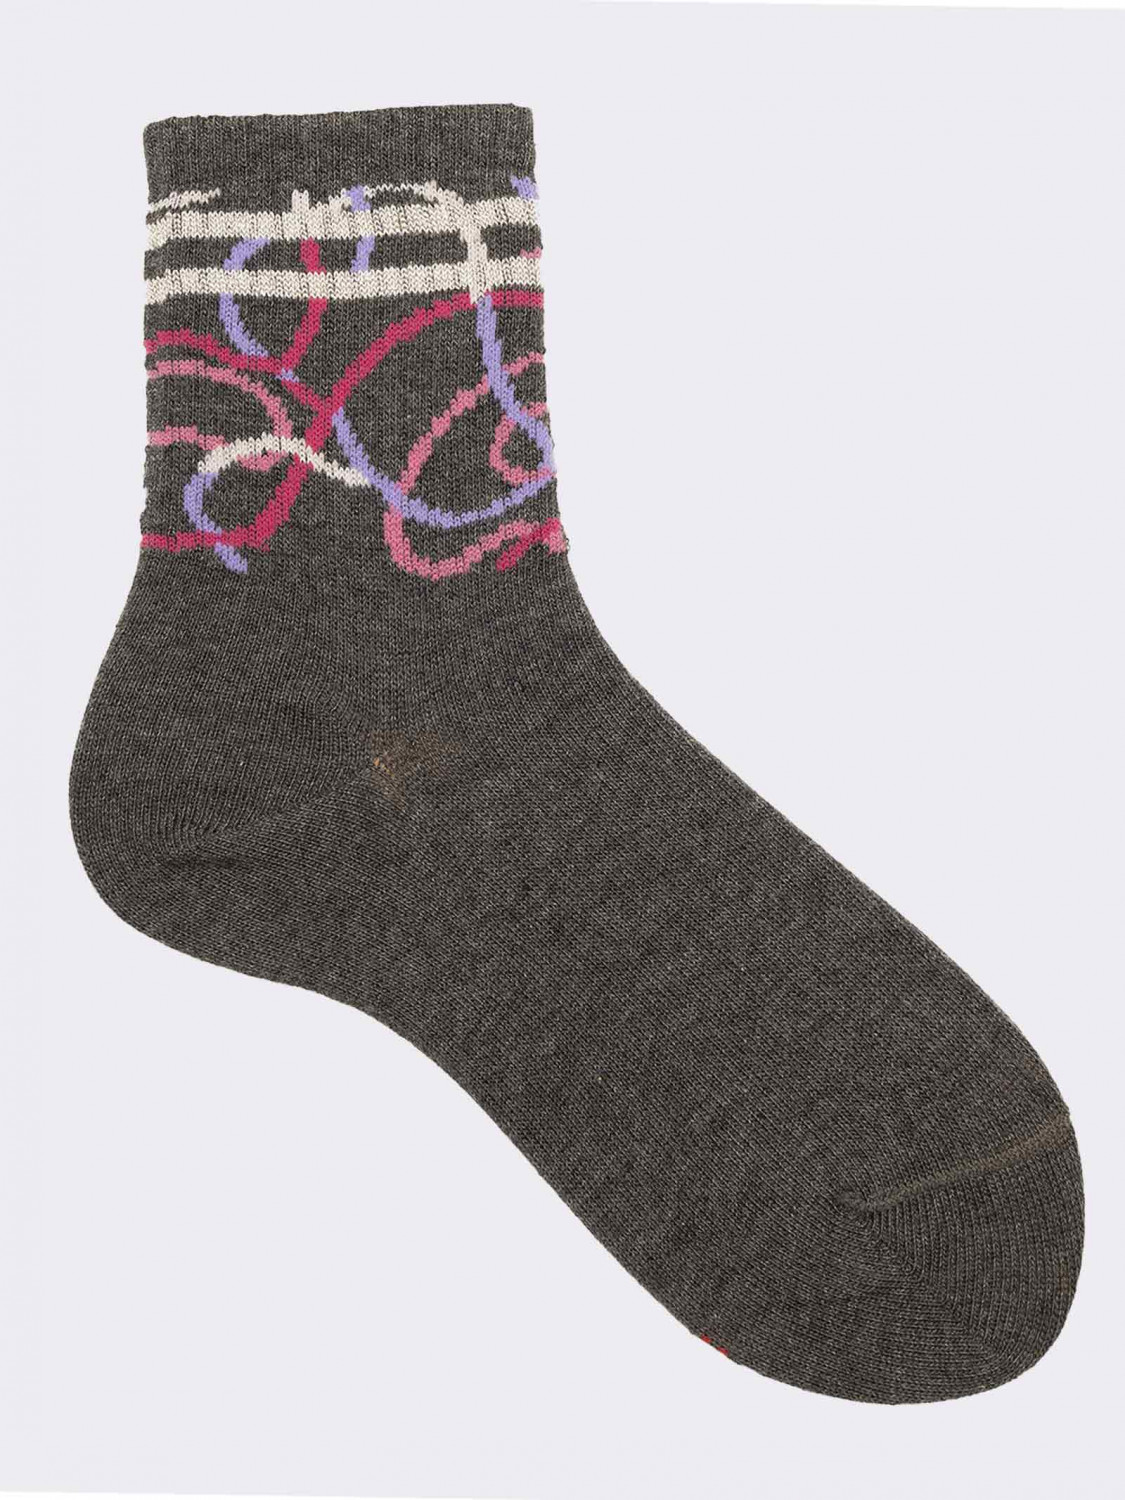 Girl's crew socks abstract patterned  in warm cotton